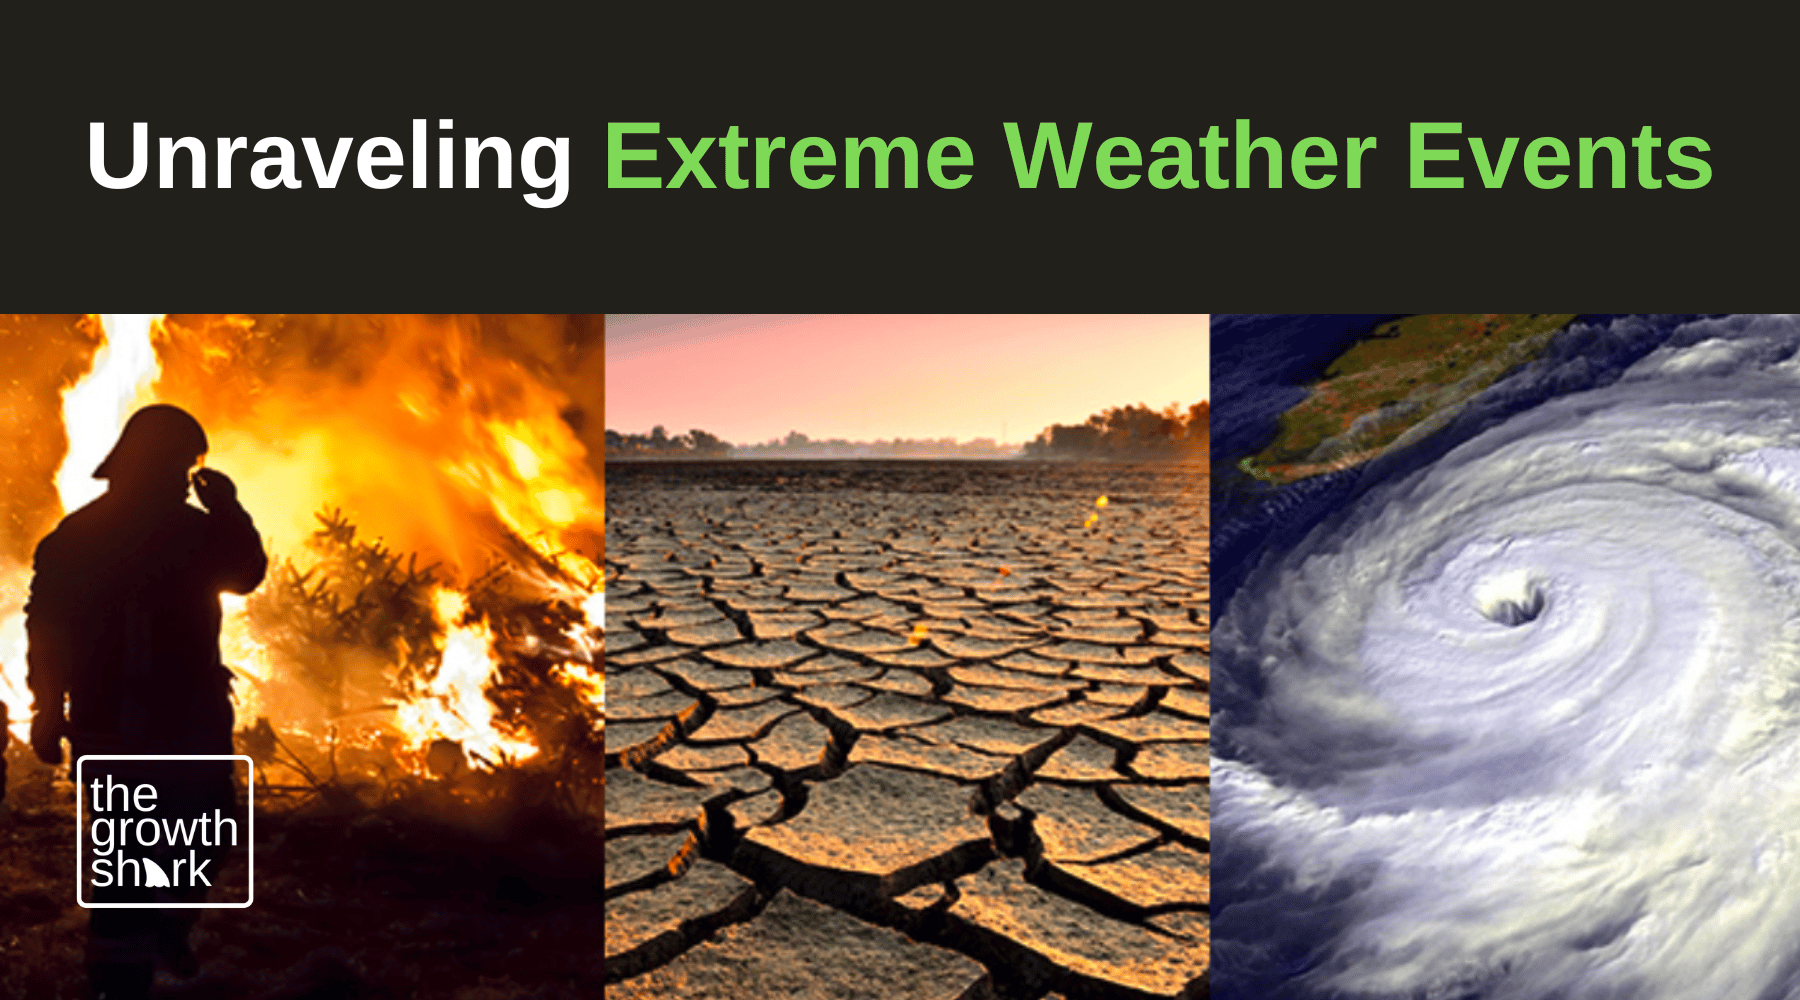 Unraveling Extreme Weather Events